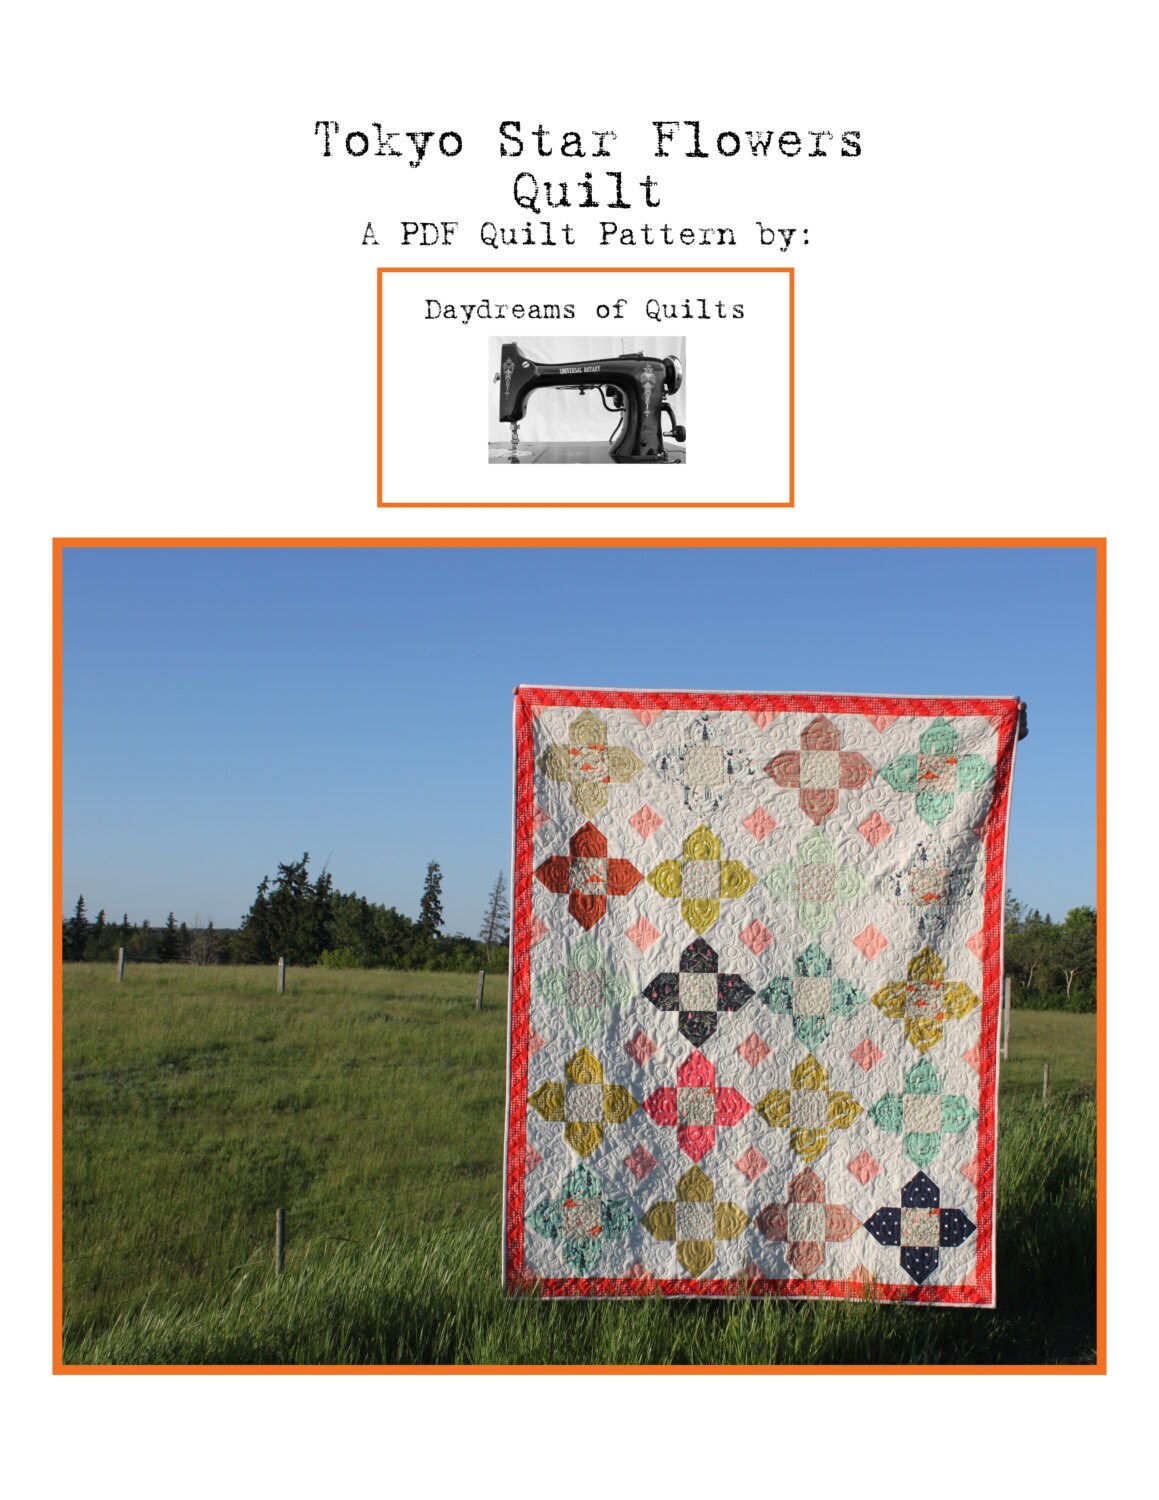 Tokyo Star Flowers Quilt, PDF Quilt Pattern, Layer Cake Pattern, Modern Throw Quilt, charm square quilt, easy quilt